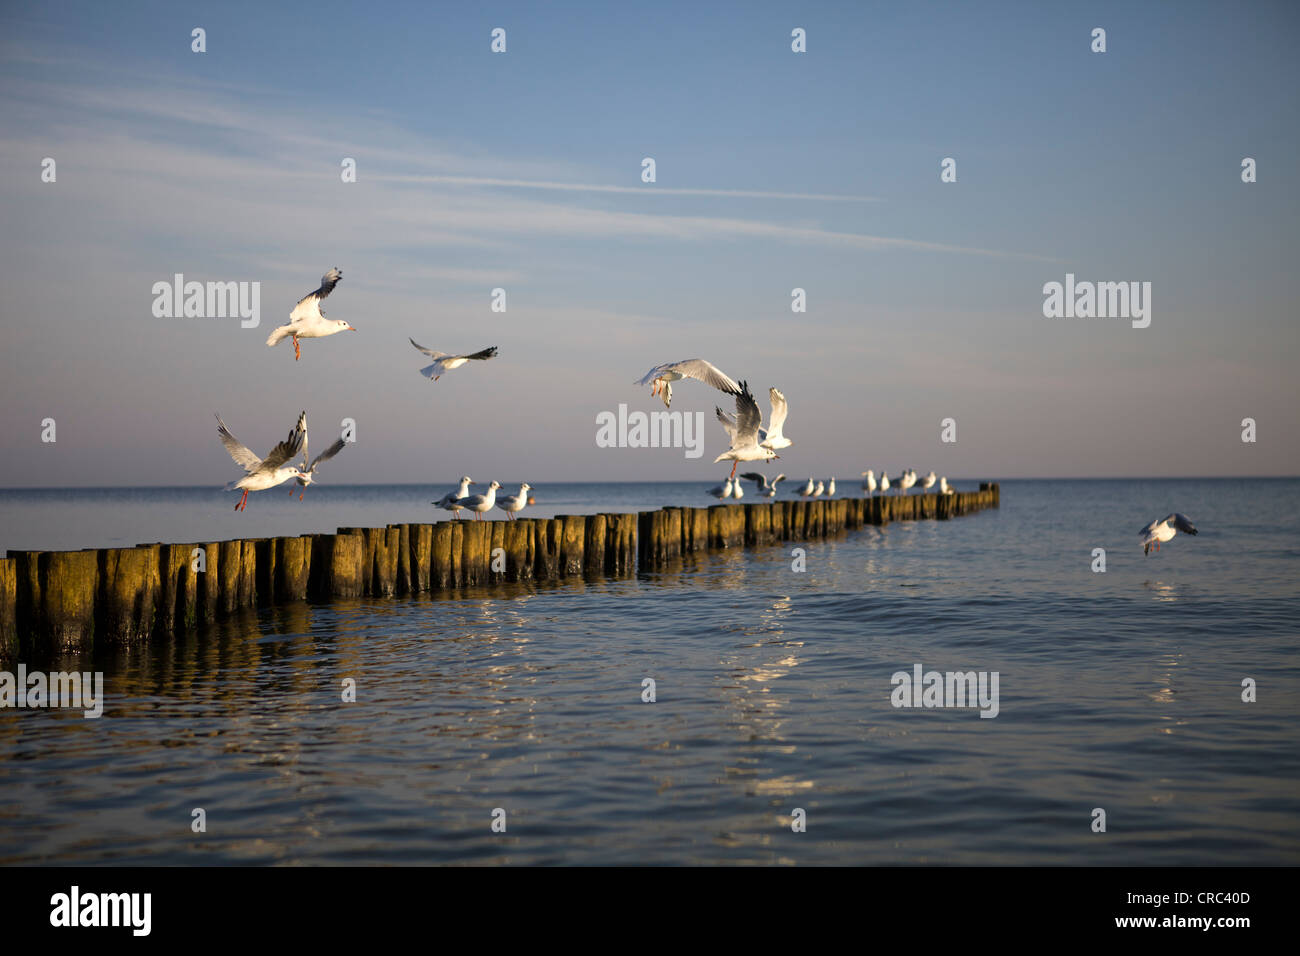 Seagulls perched on groynes in the morning light on the Baltic Sea near Rostock, Mecklenburg-Western Pomerania, Germany, Europe Stock Photo